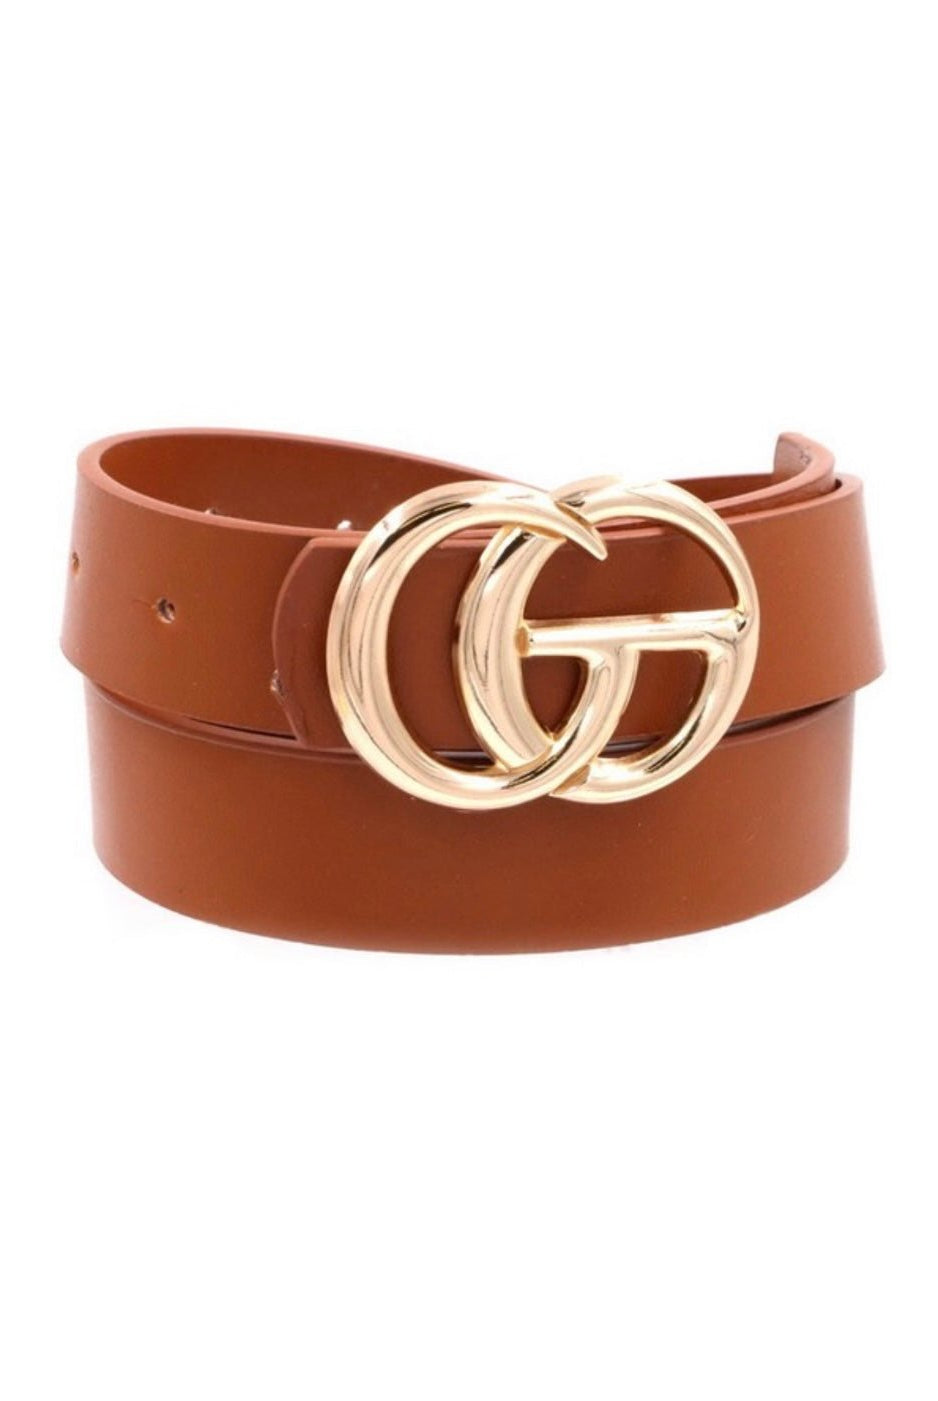 1" CG Faux Leather 40' Buckle Belt - -Jimberly's Boutique-Olive Branch-Mississippi